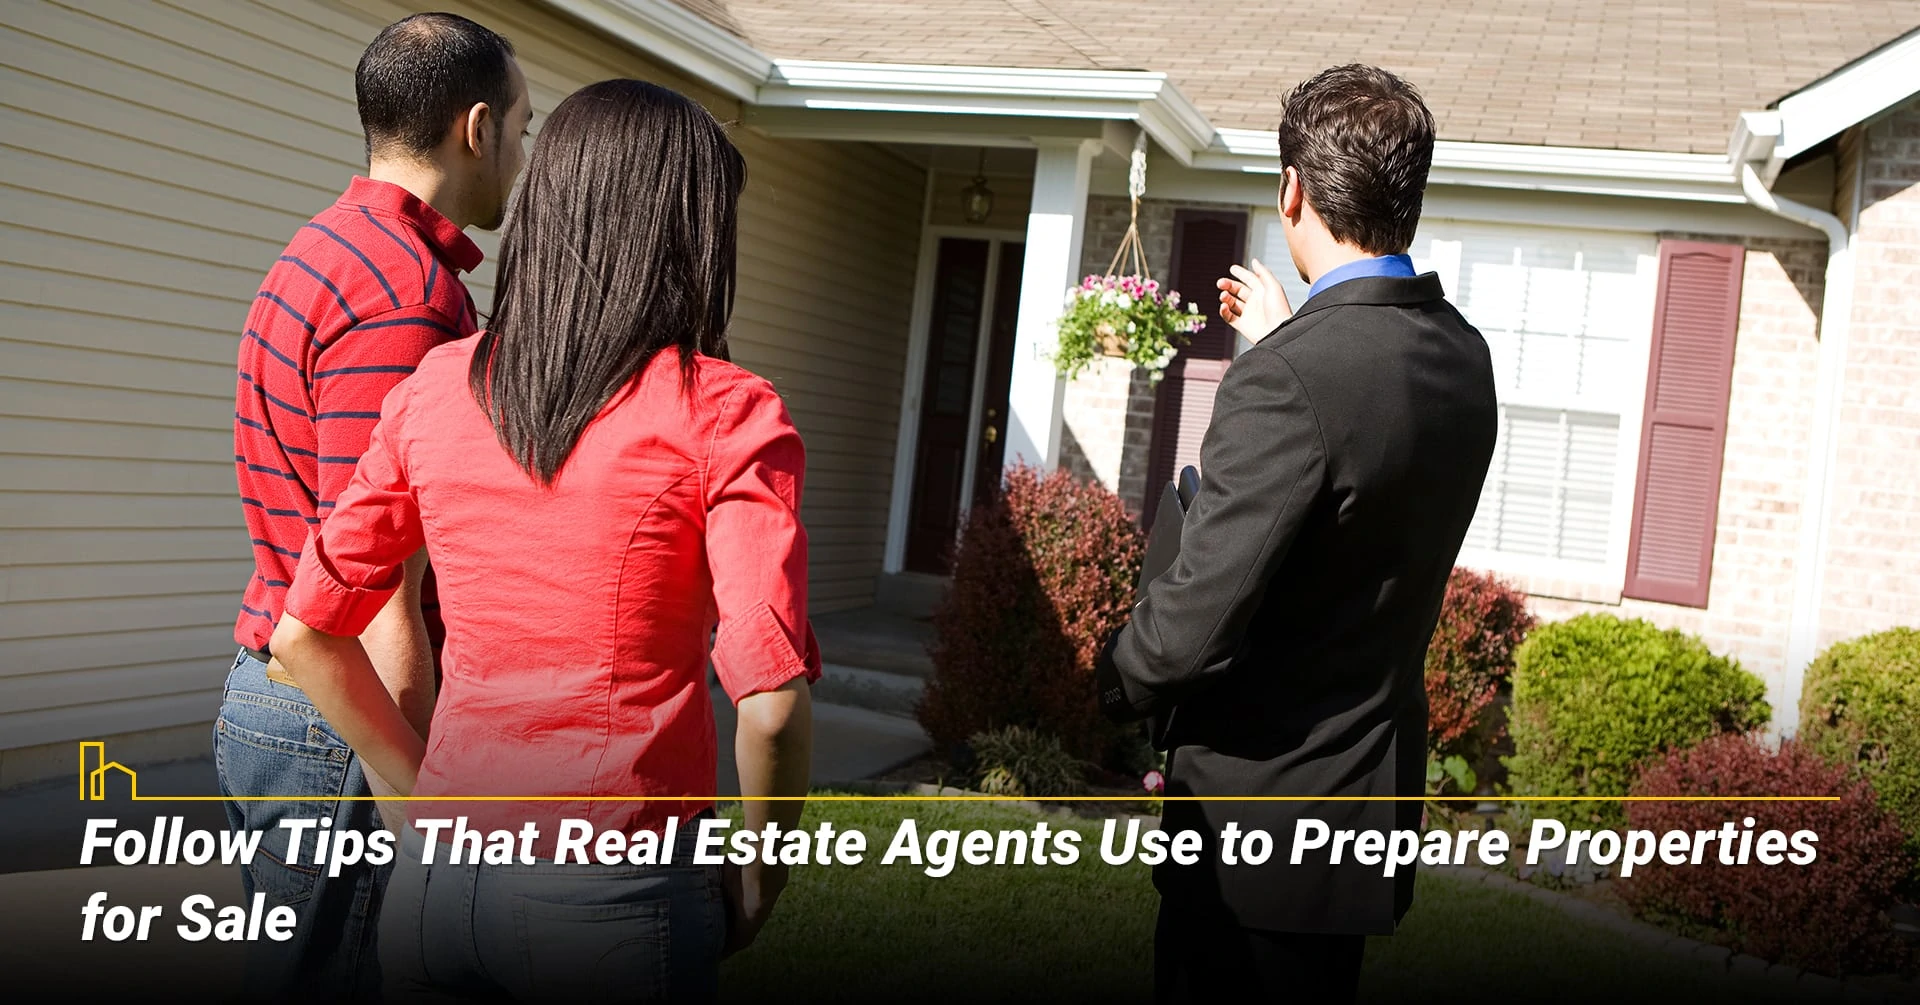 Follow Tips That Real Estate Agents Use to Prepare Properties for Sale, take your agent's advice